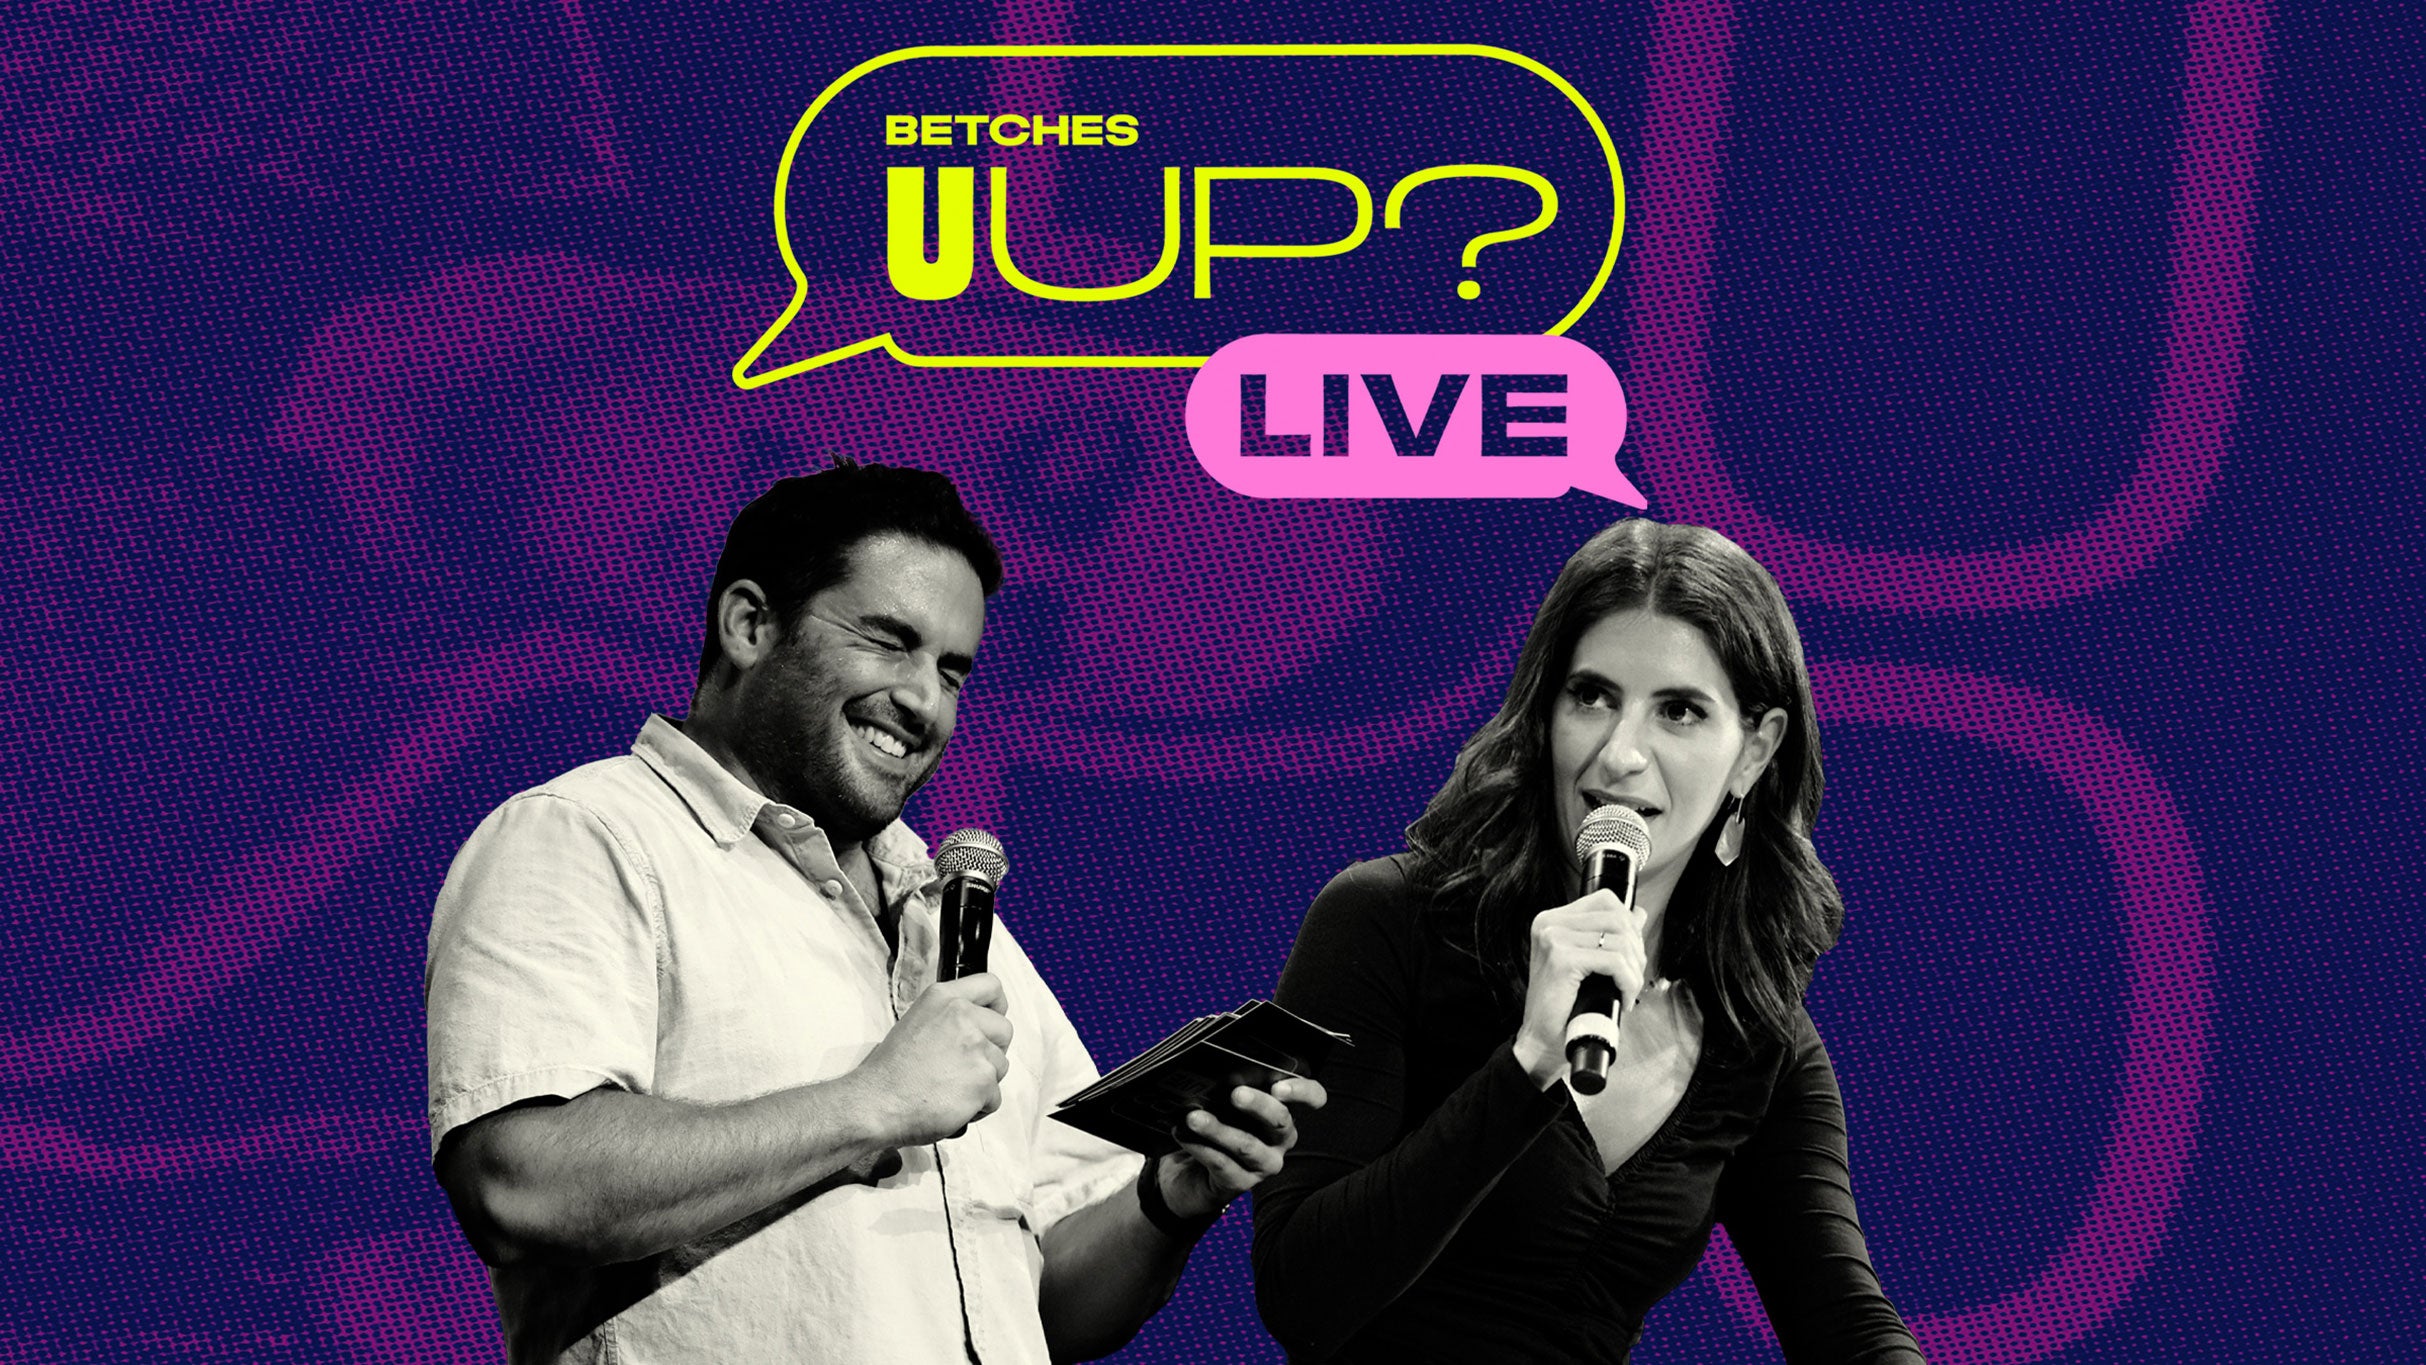 Betches U Up? Live Presented By Faux Pas free presale passcode for early tickets in Boston